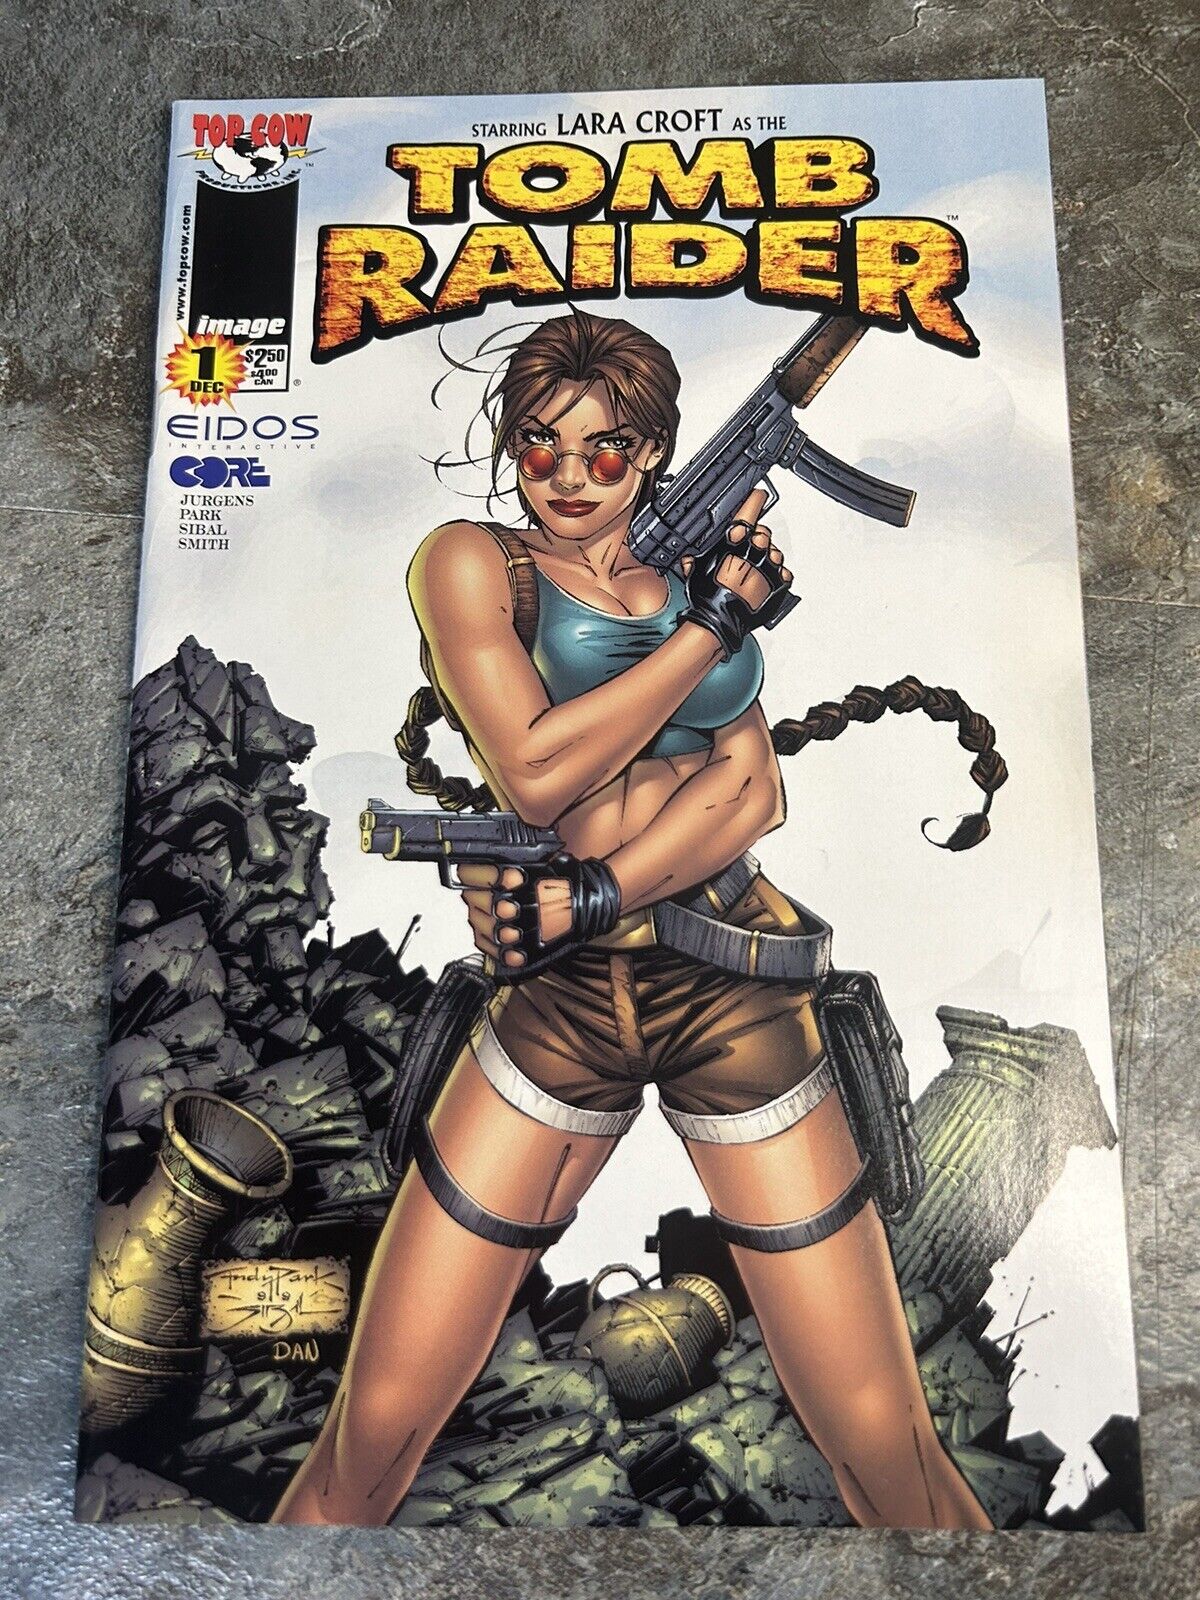 Tomb Raider Starring Lara Croft Issue #1 Comic Book Top Cow Single Cover 1A